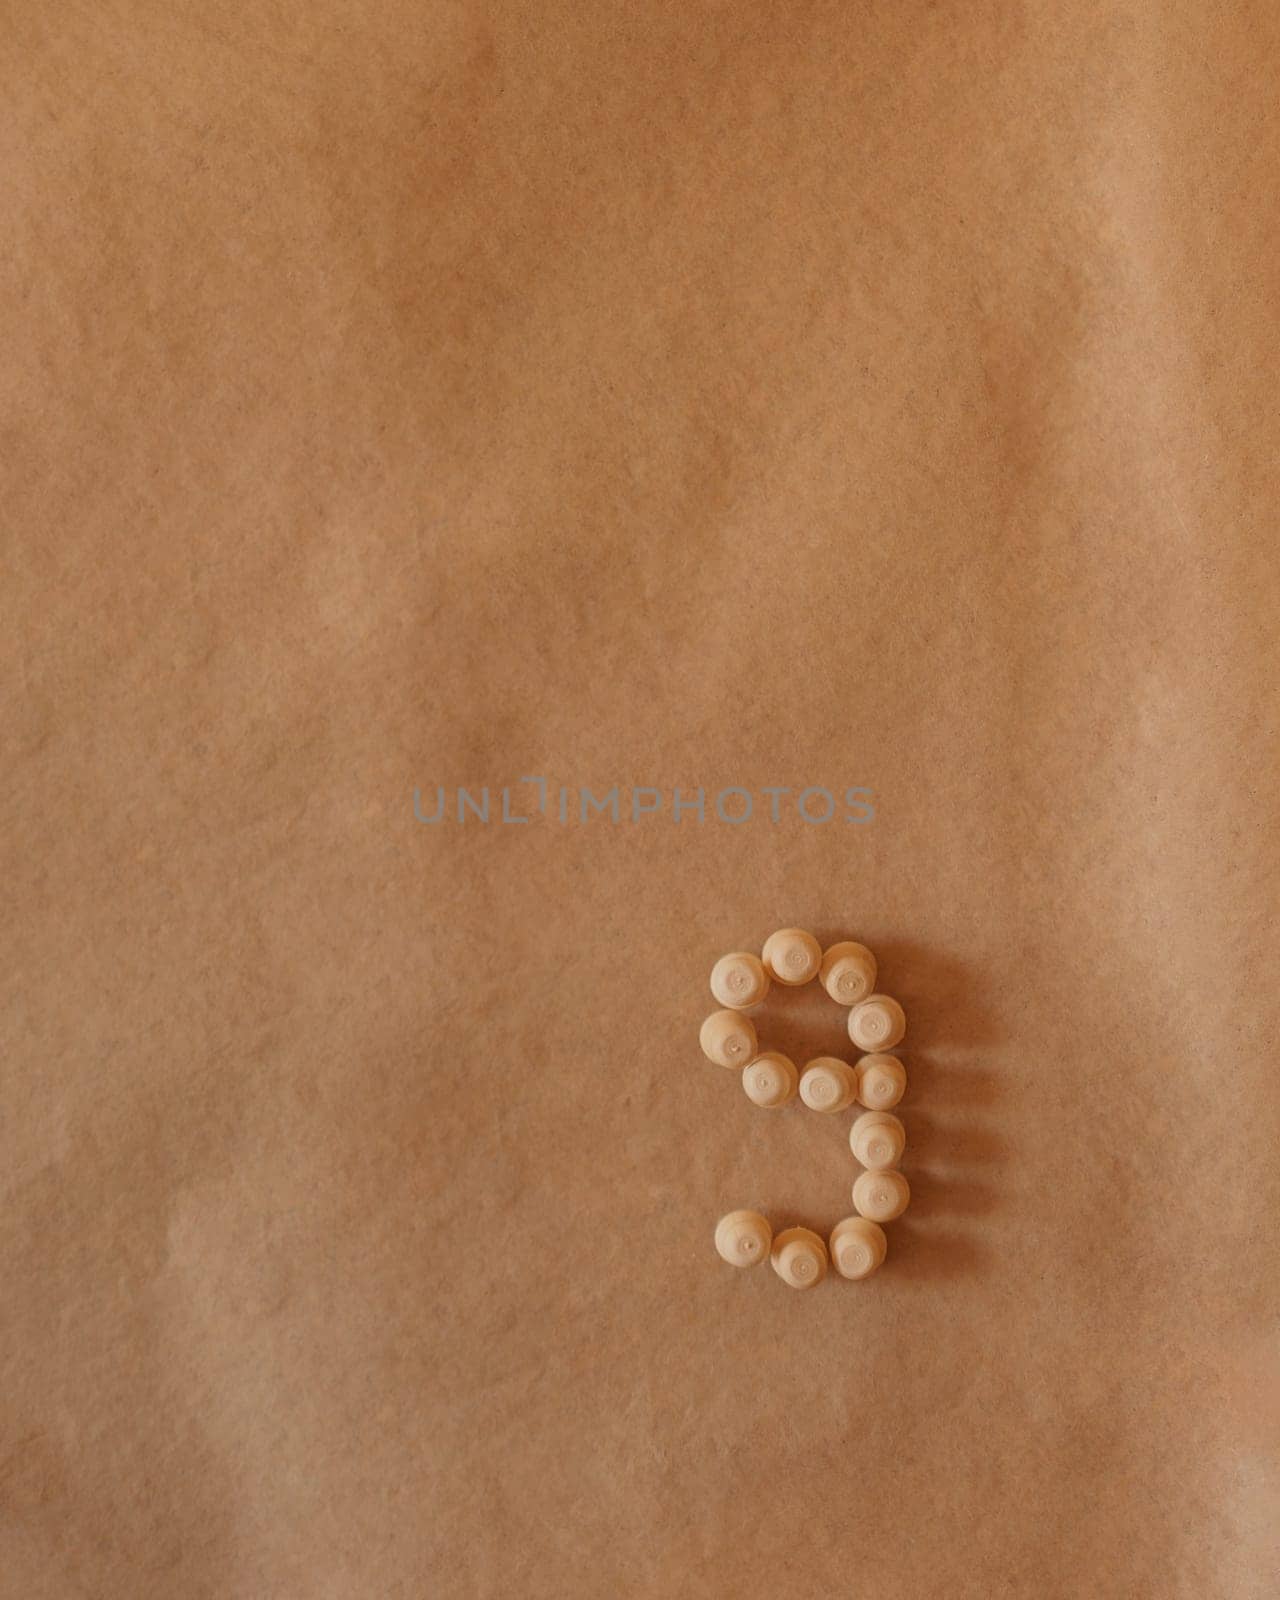 A minimalist composition of wooden pins forming the number nine on a brown background.